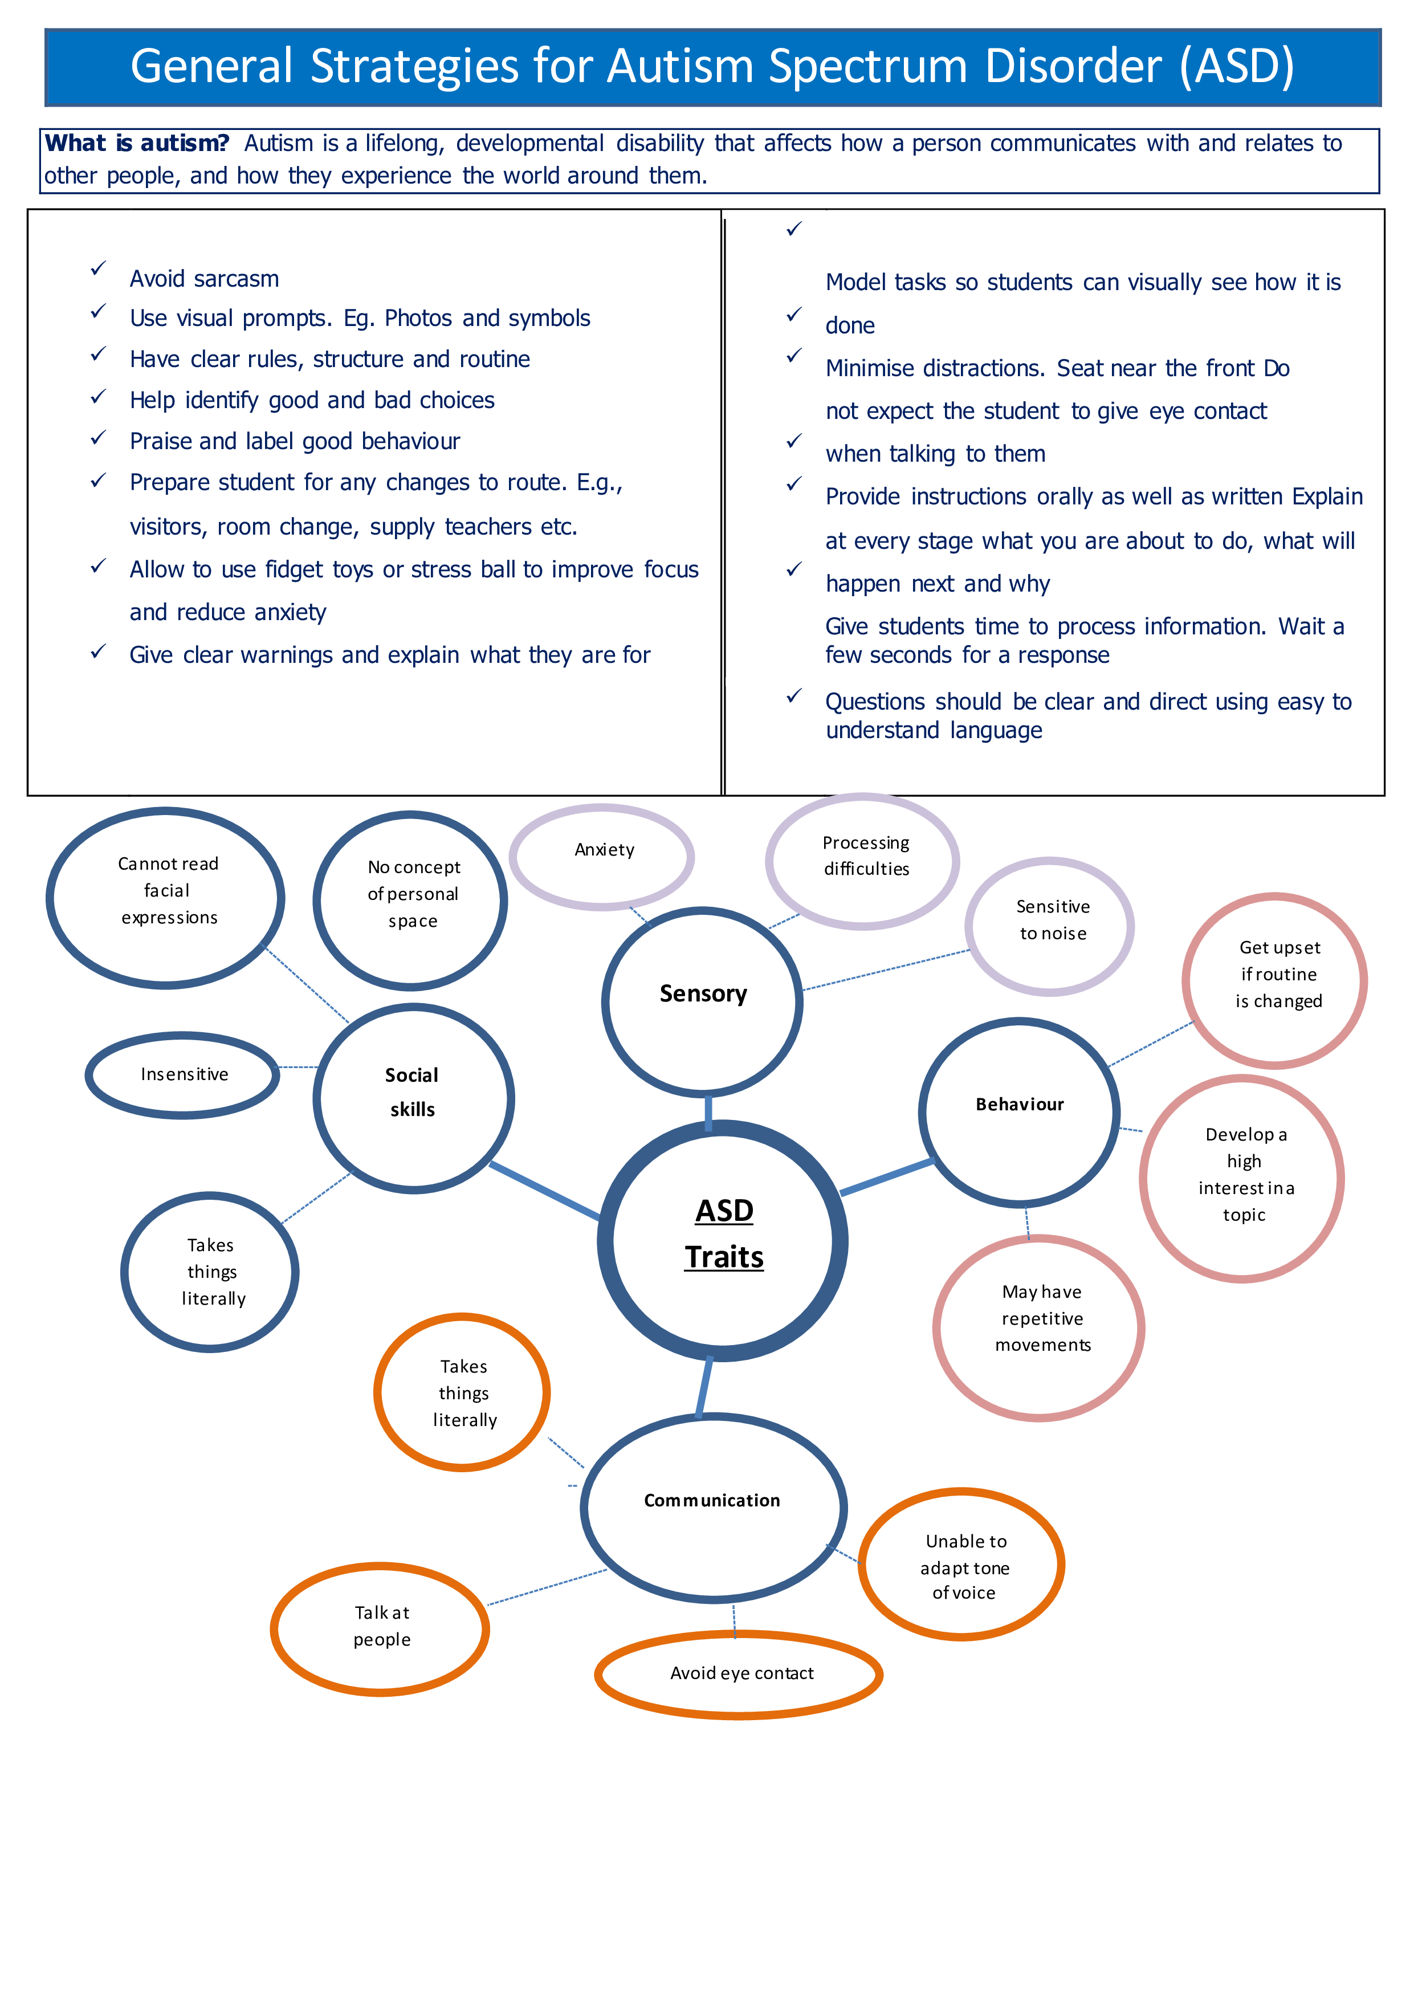 Guide to supporting pupils BPS 0003